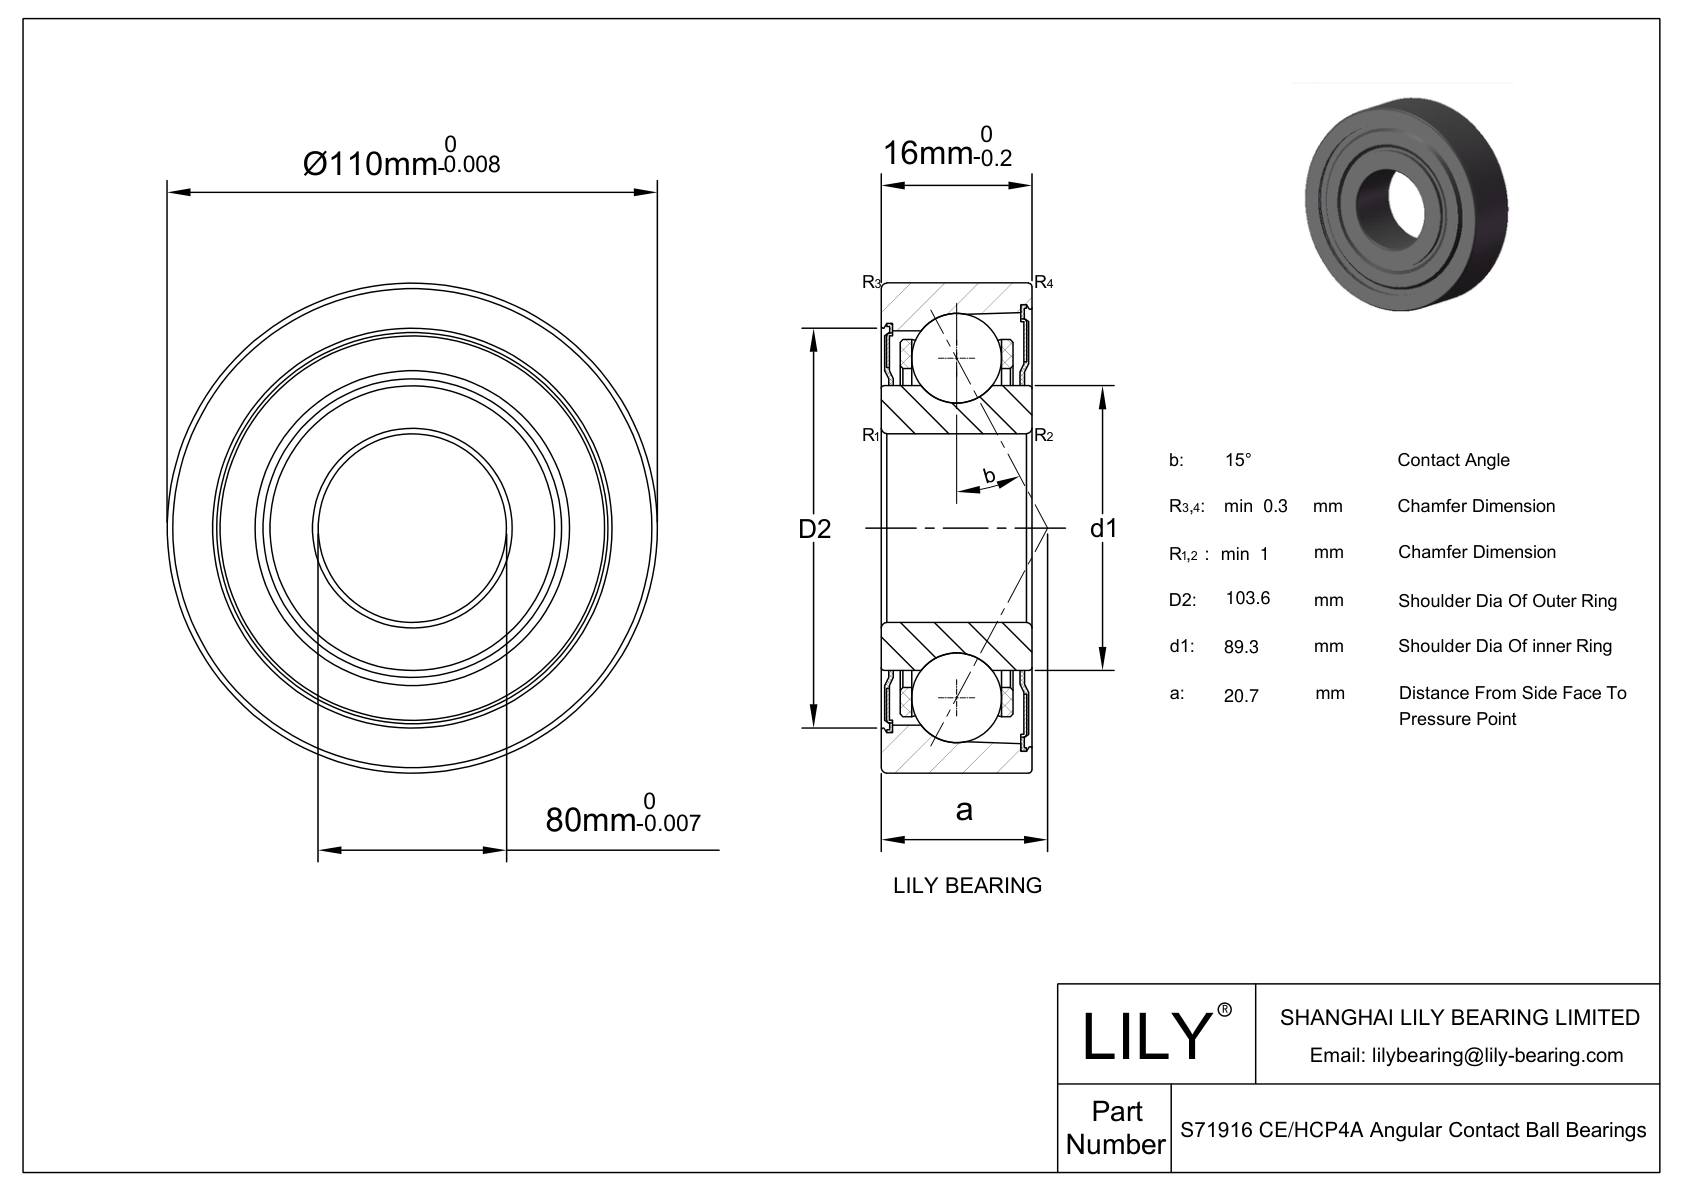 S71916 CE/HCP4A Super Precision Angular Contact Ball Bearings cad drawing